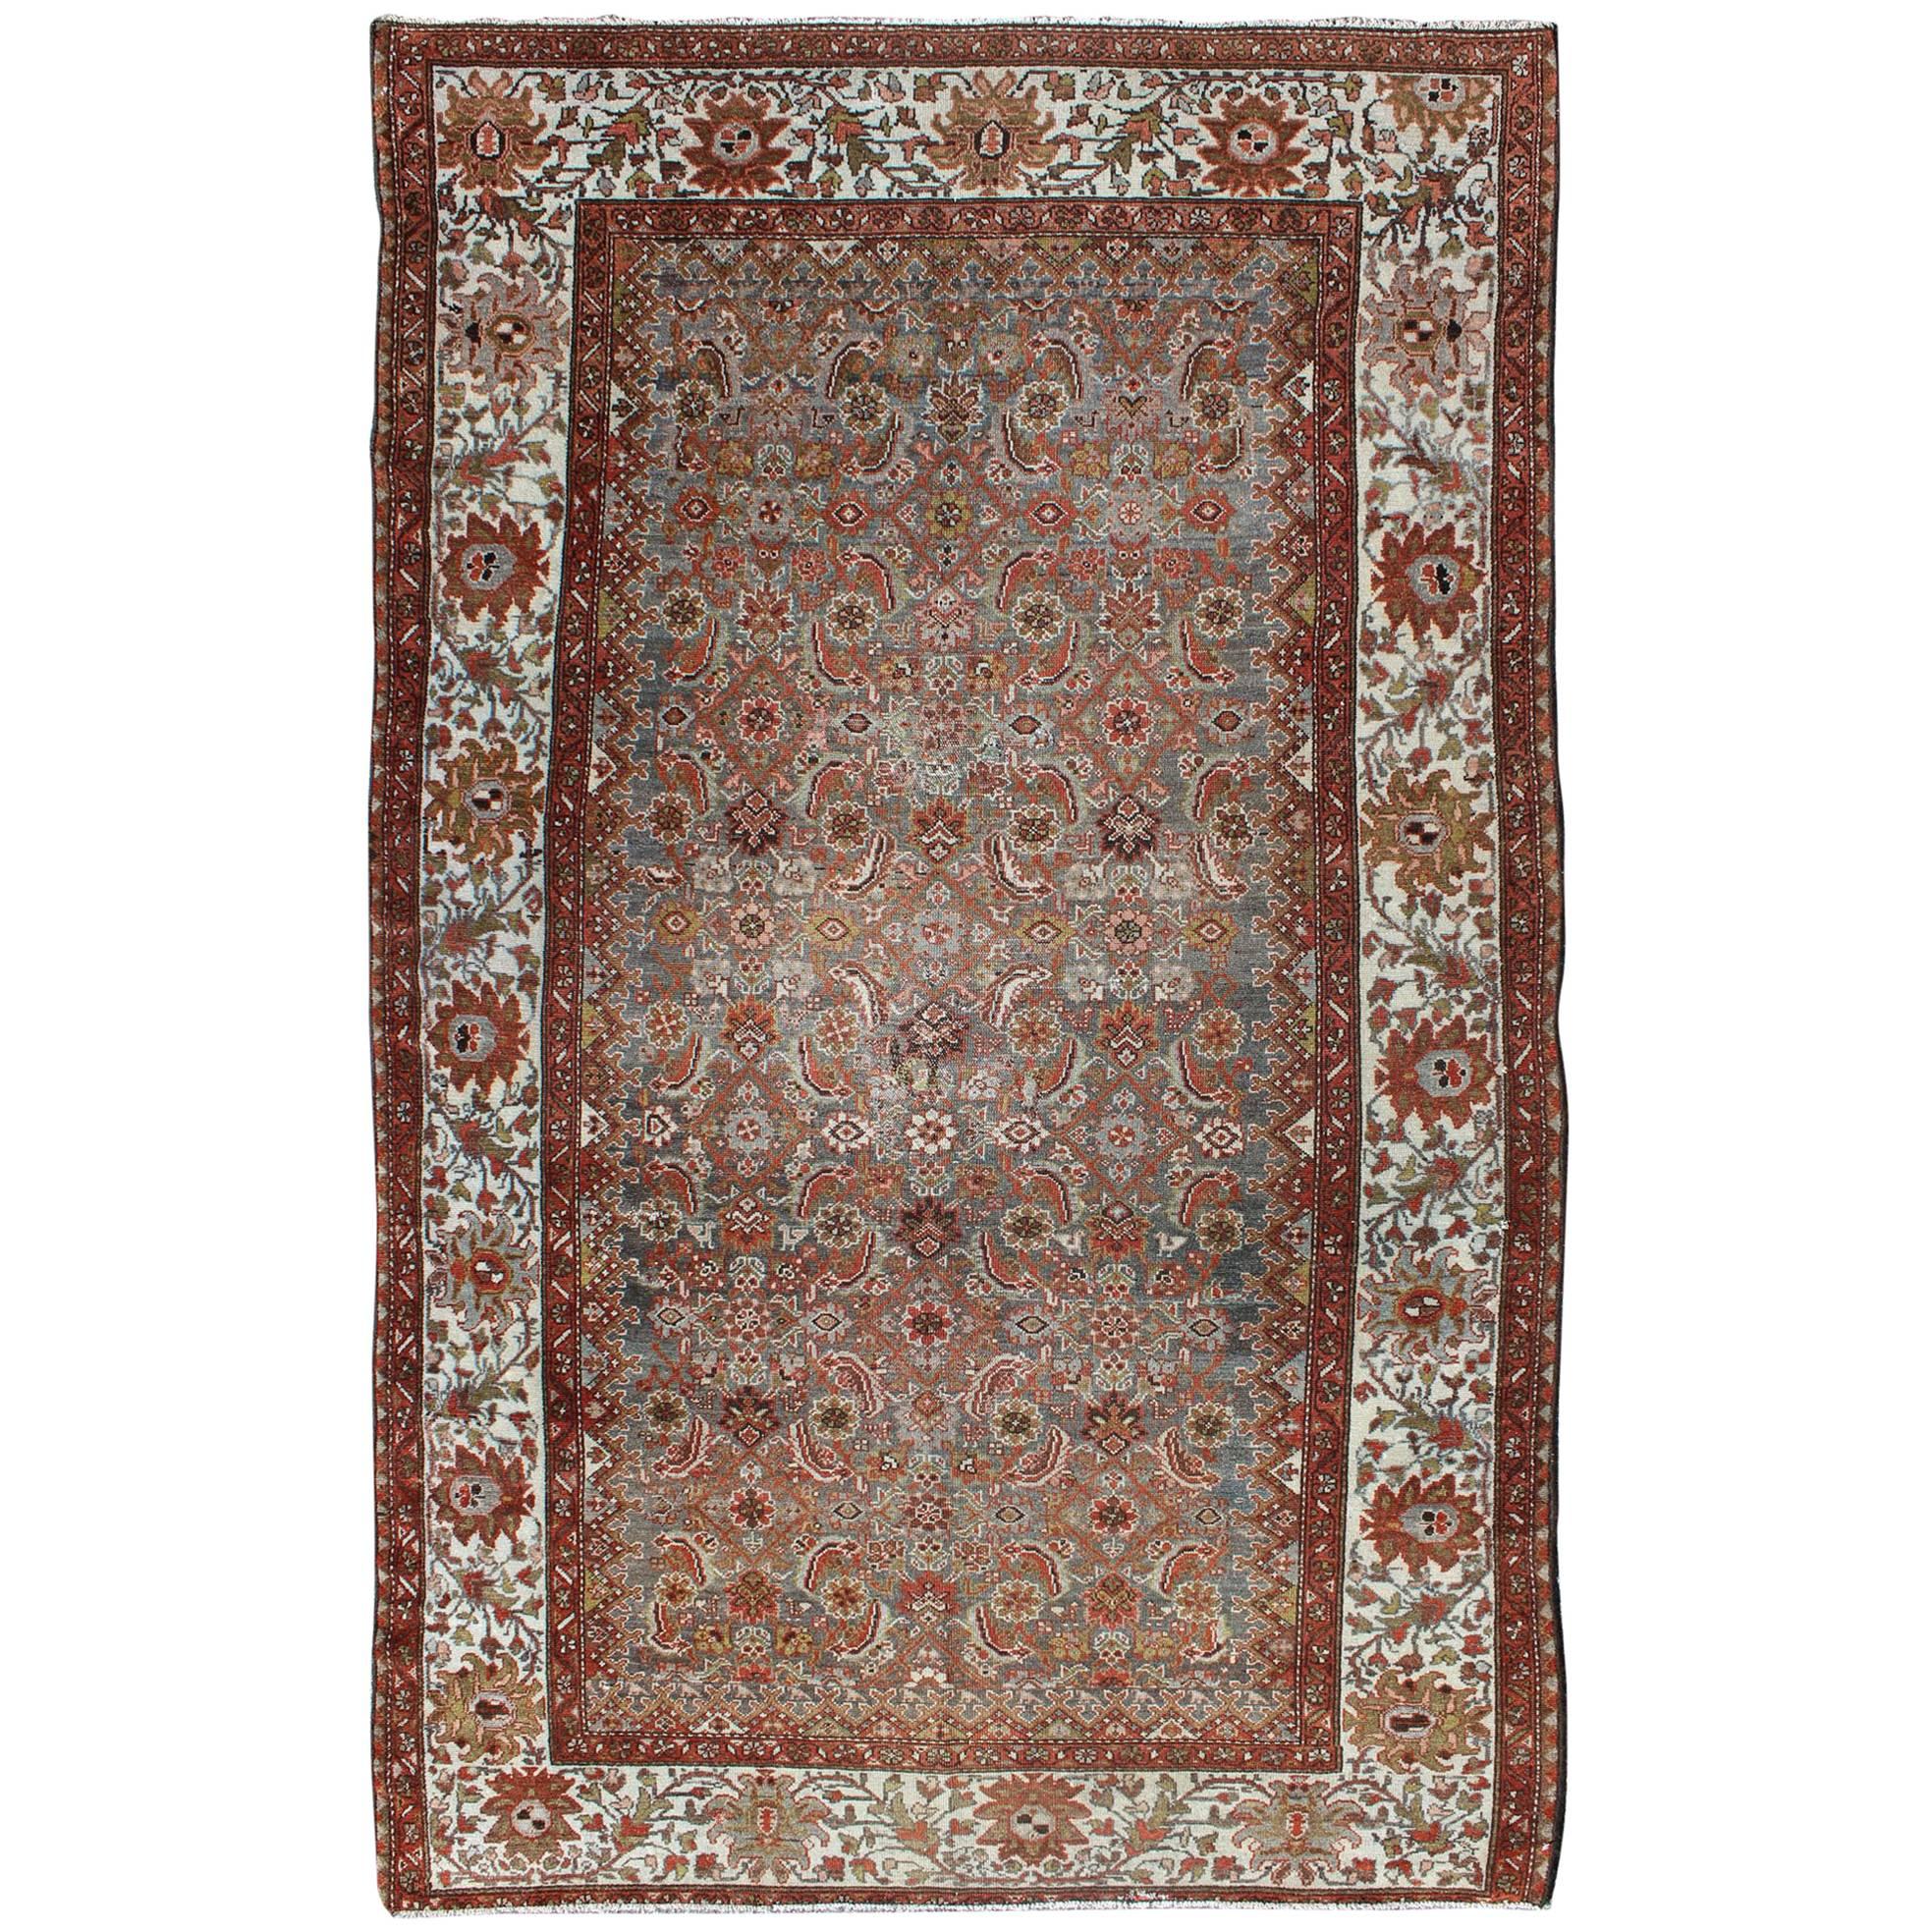 Antique Persian Malayer Rug with Gray, Light Blue, Red and Taupe